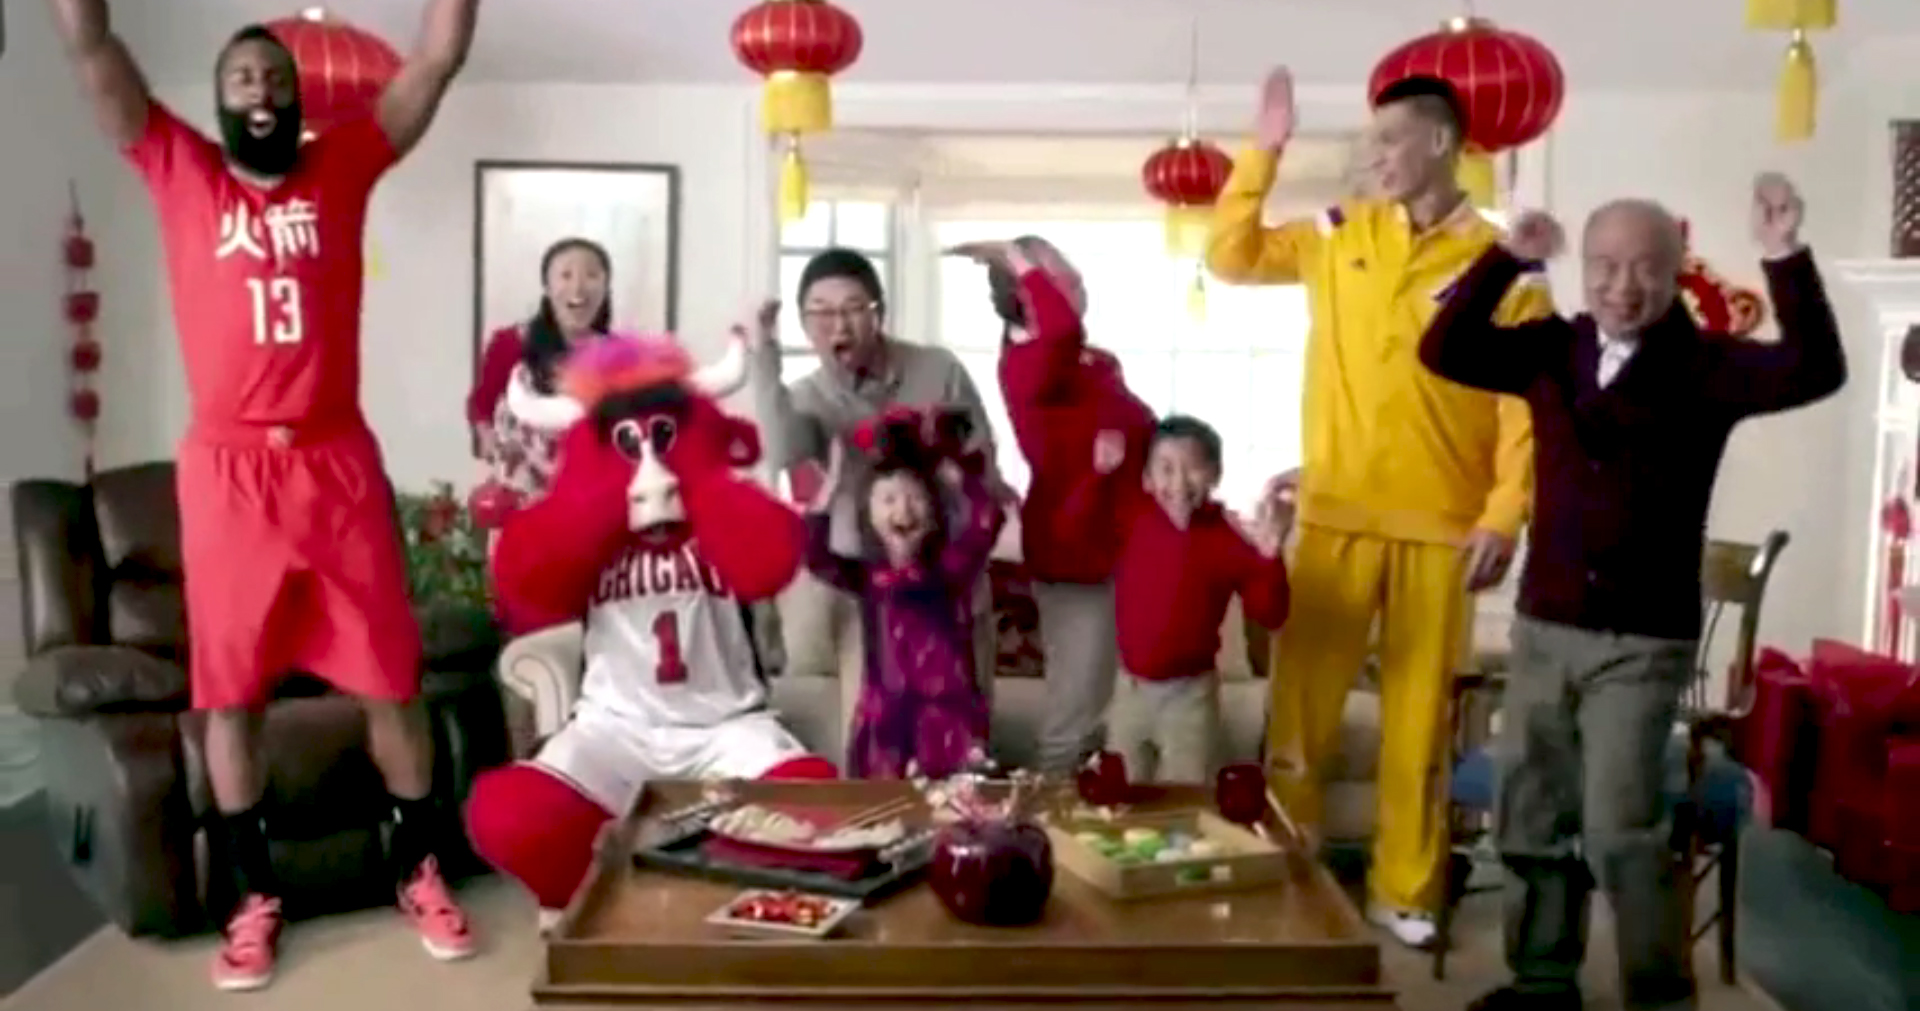 harden chinese jersey